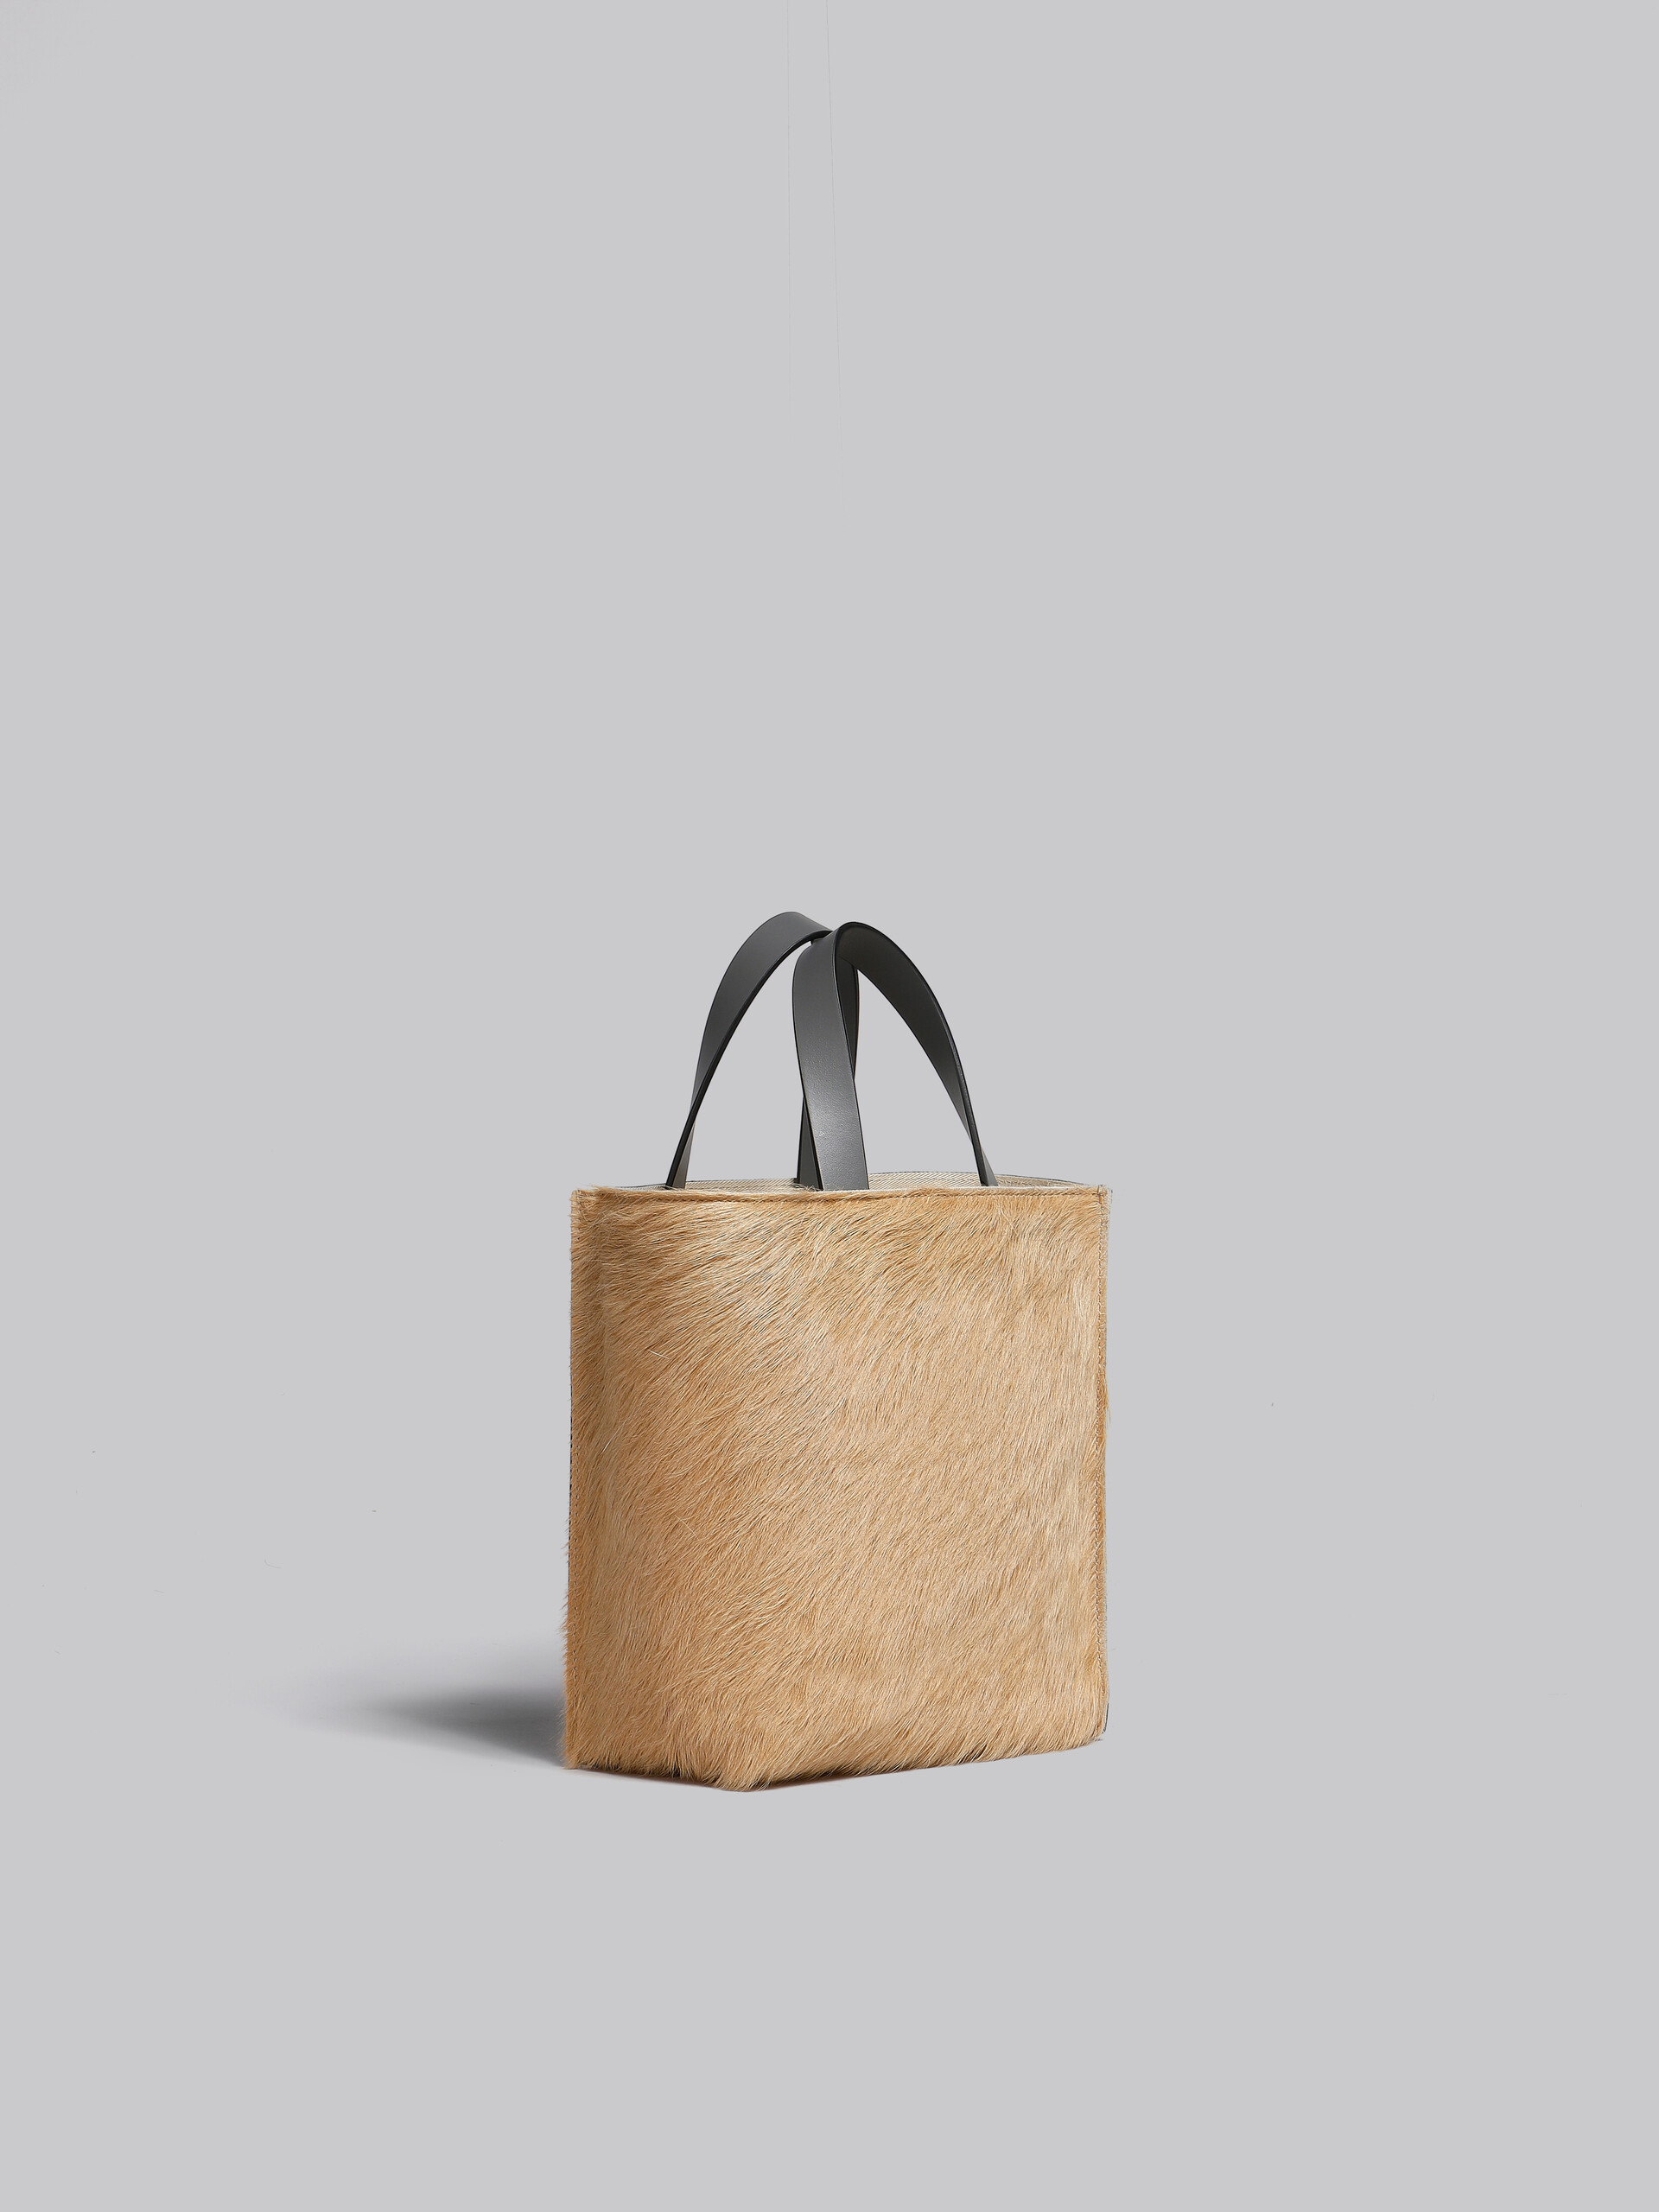 Museo Soft Mini Bag in light brown beige and grey long-hair calfskin - Shopping Bags - Image 6